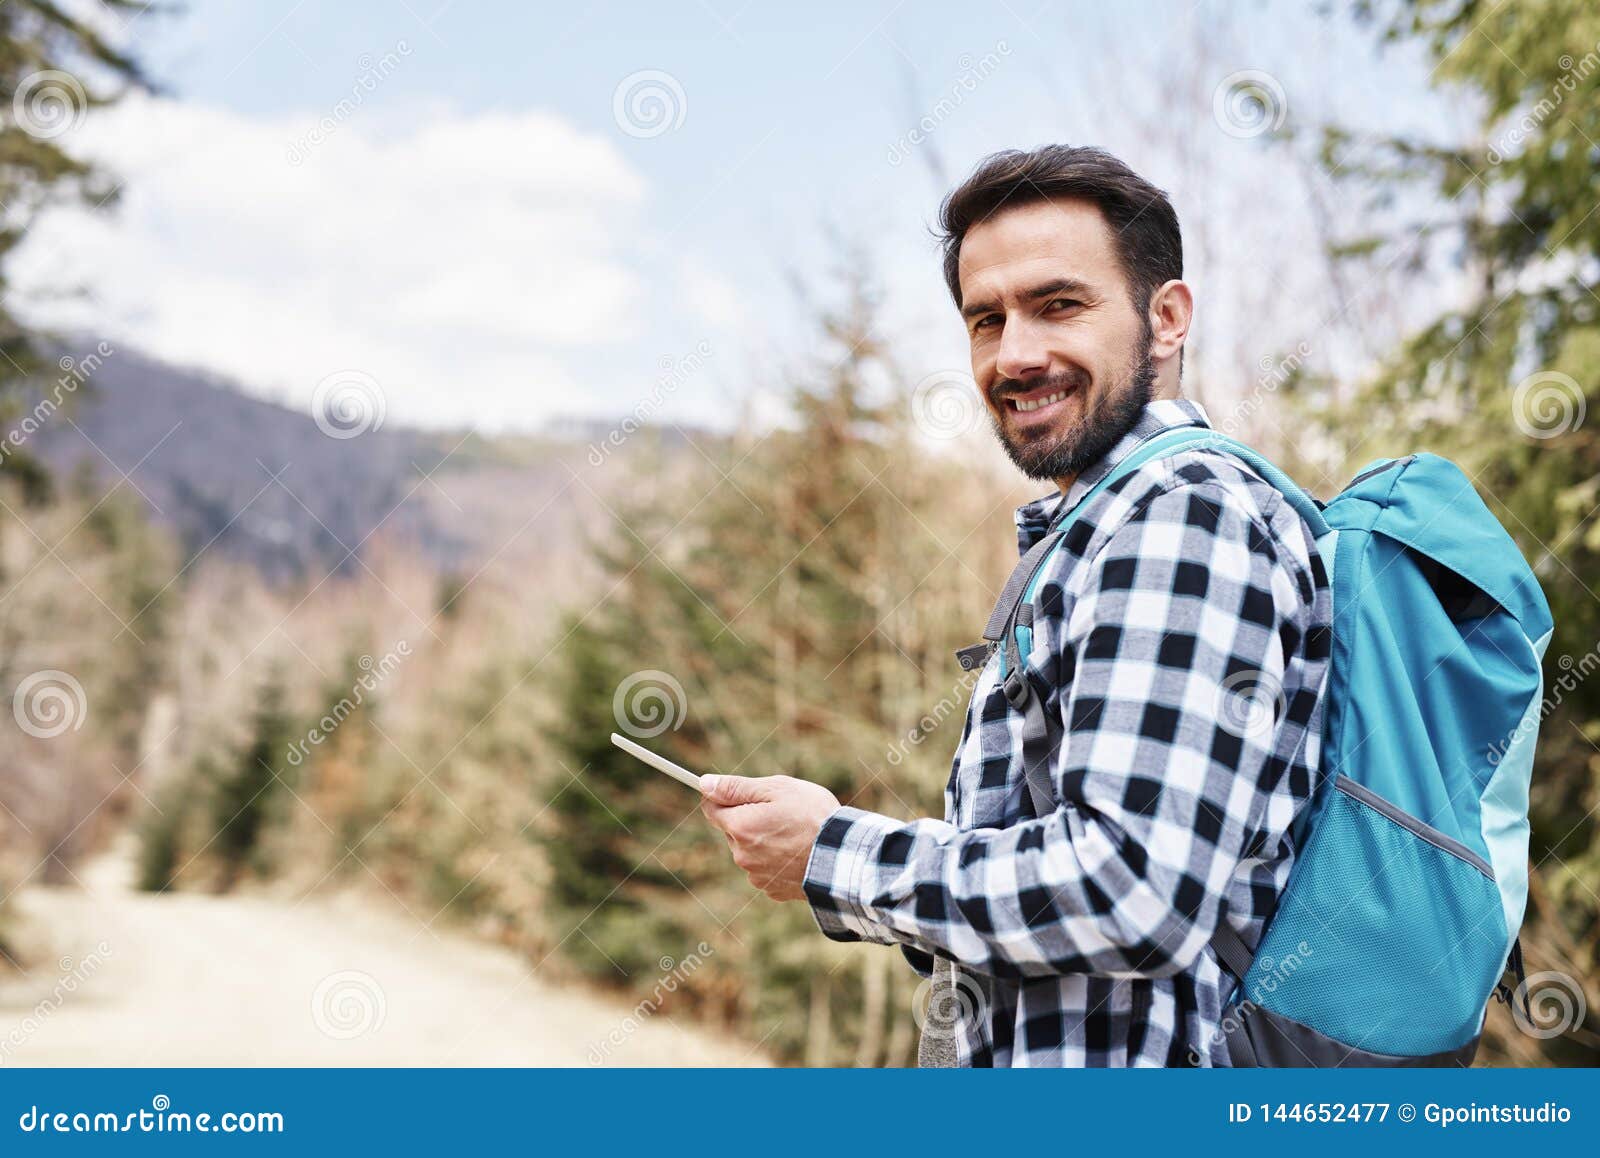 Portrait of Smiling Hiker Using Mobile Phone during Hiking Trip Stock ...